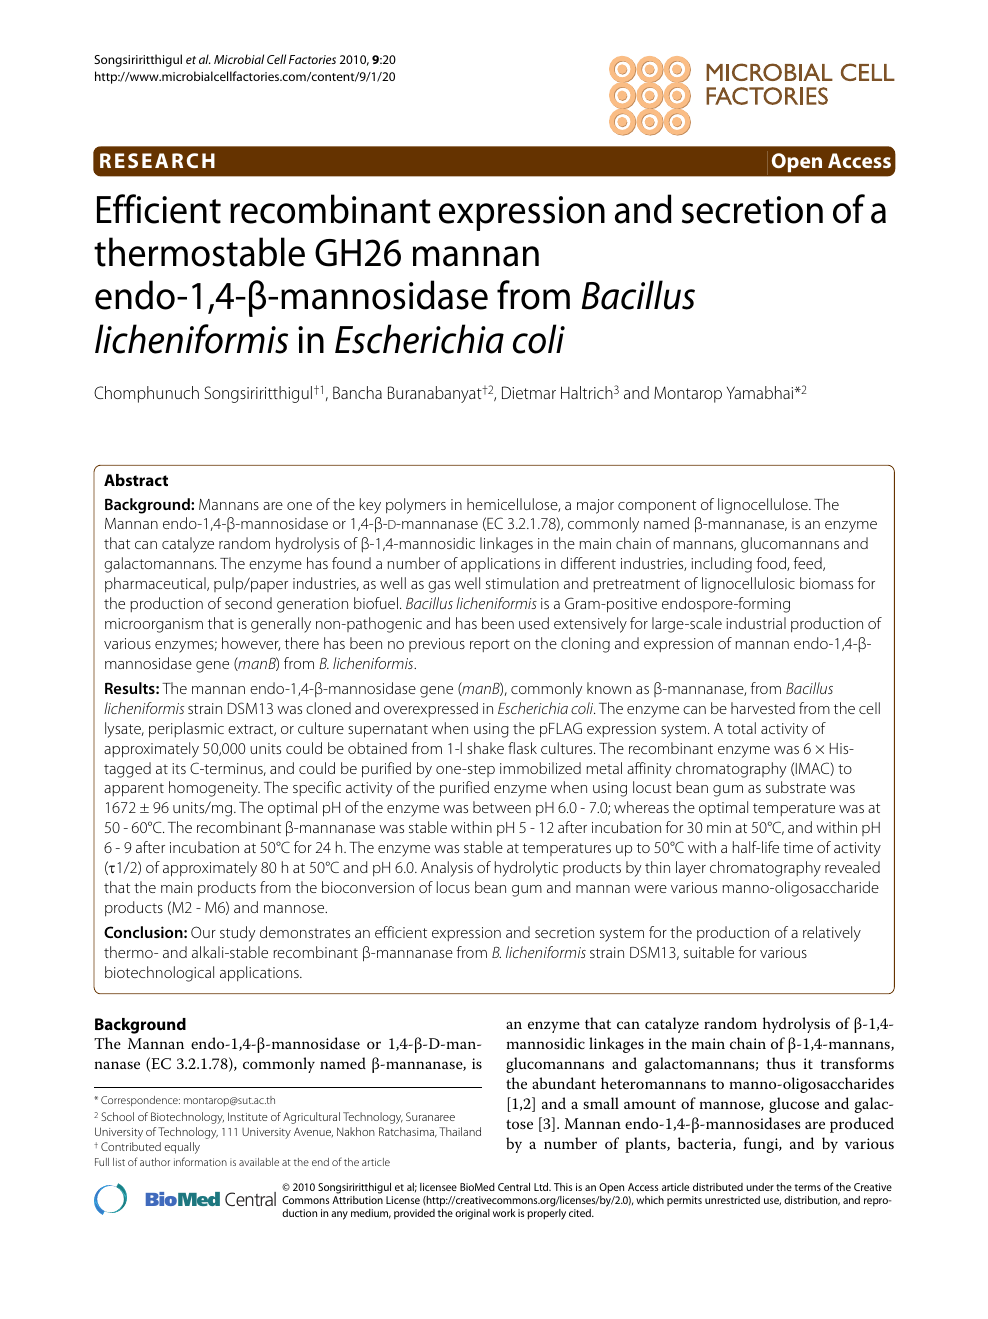 Efficient Recombinant Expression And Secretion Of A Thermostable Gh26 Mannan Endo 1 4 B Mannosidase From Bacillus Licheniformis In Escherichia Coli Topic Of Research Paper In Biological Sciences Download Scholarly Article Pdf And Read For